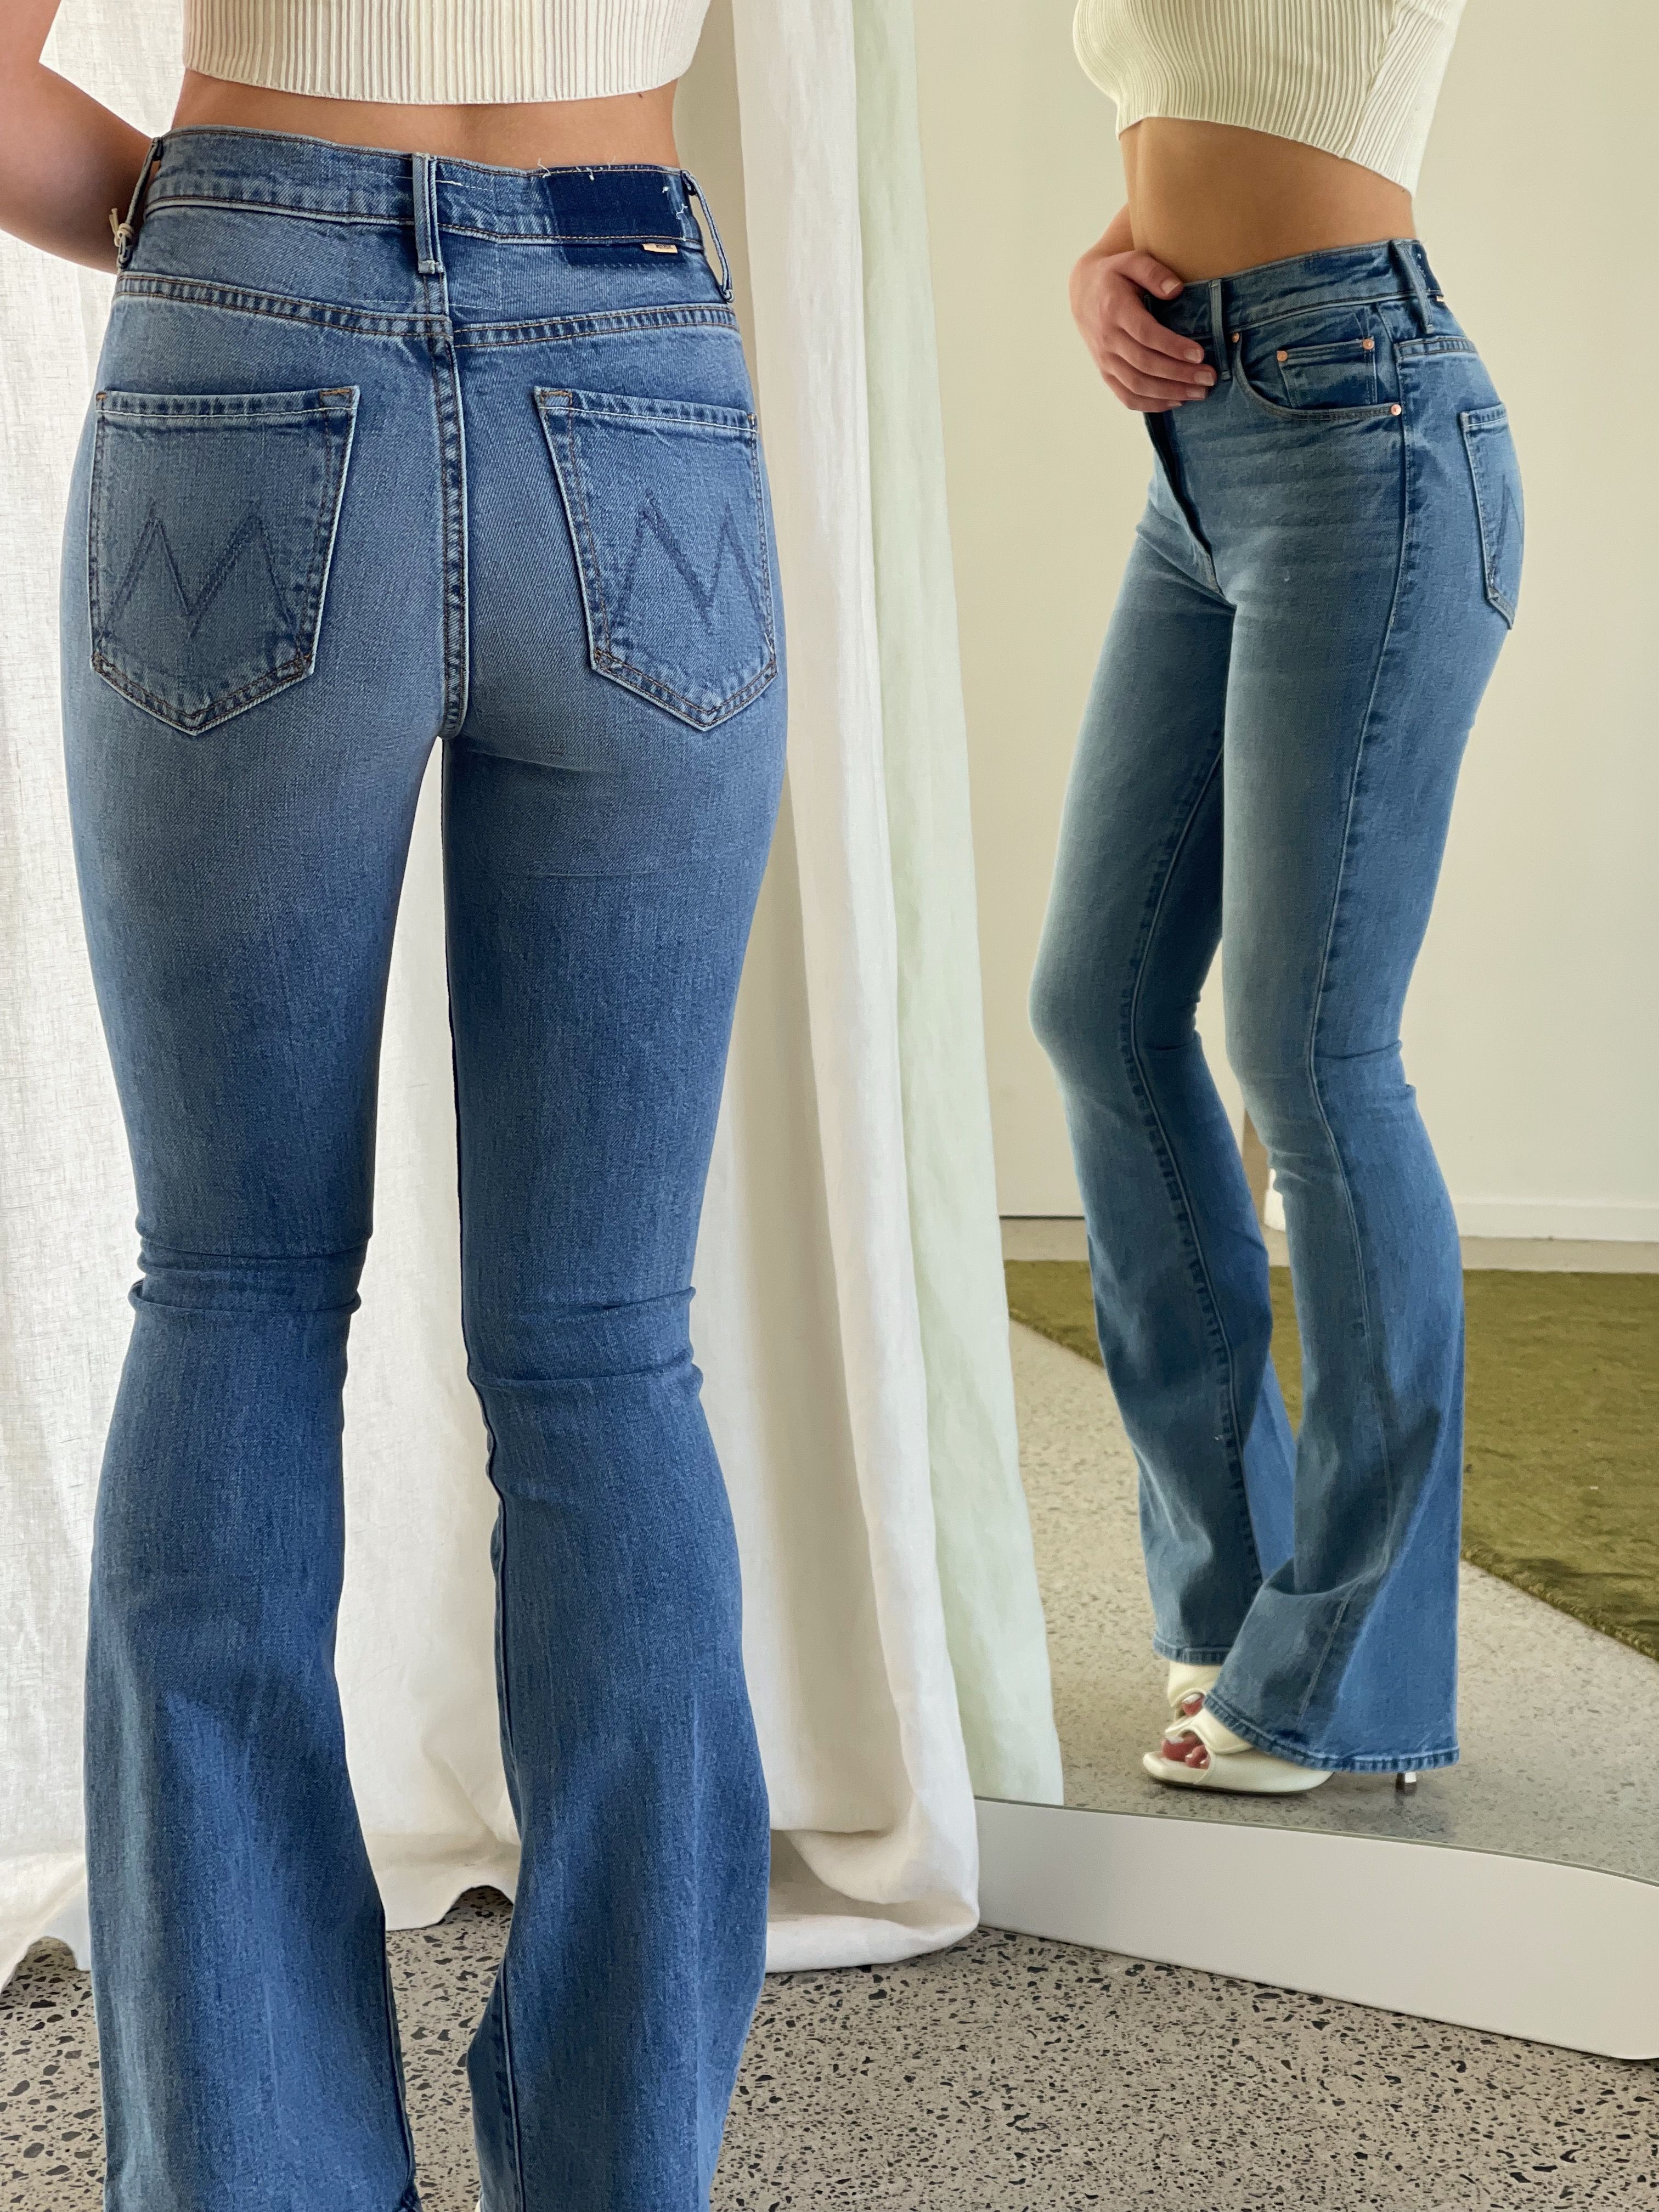 Finding Your Perfect Denim